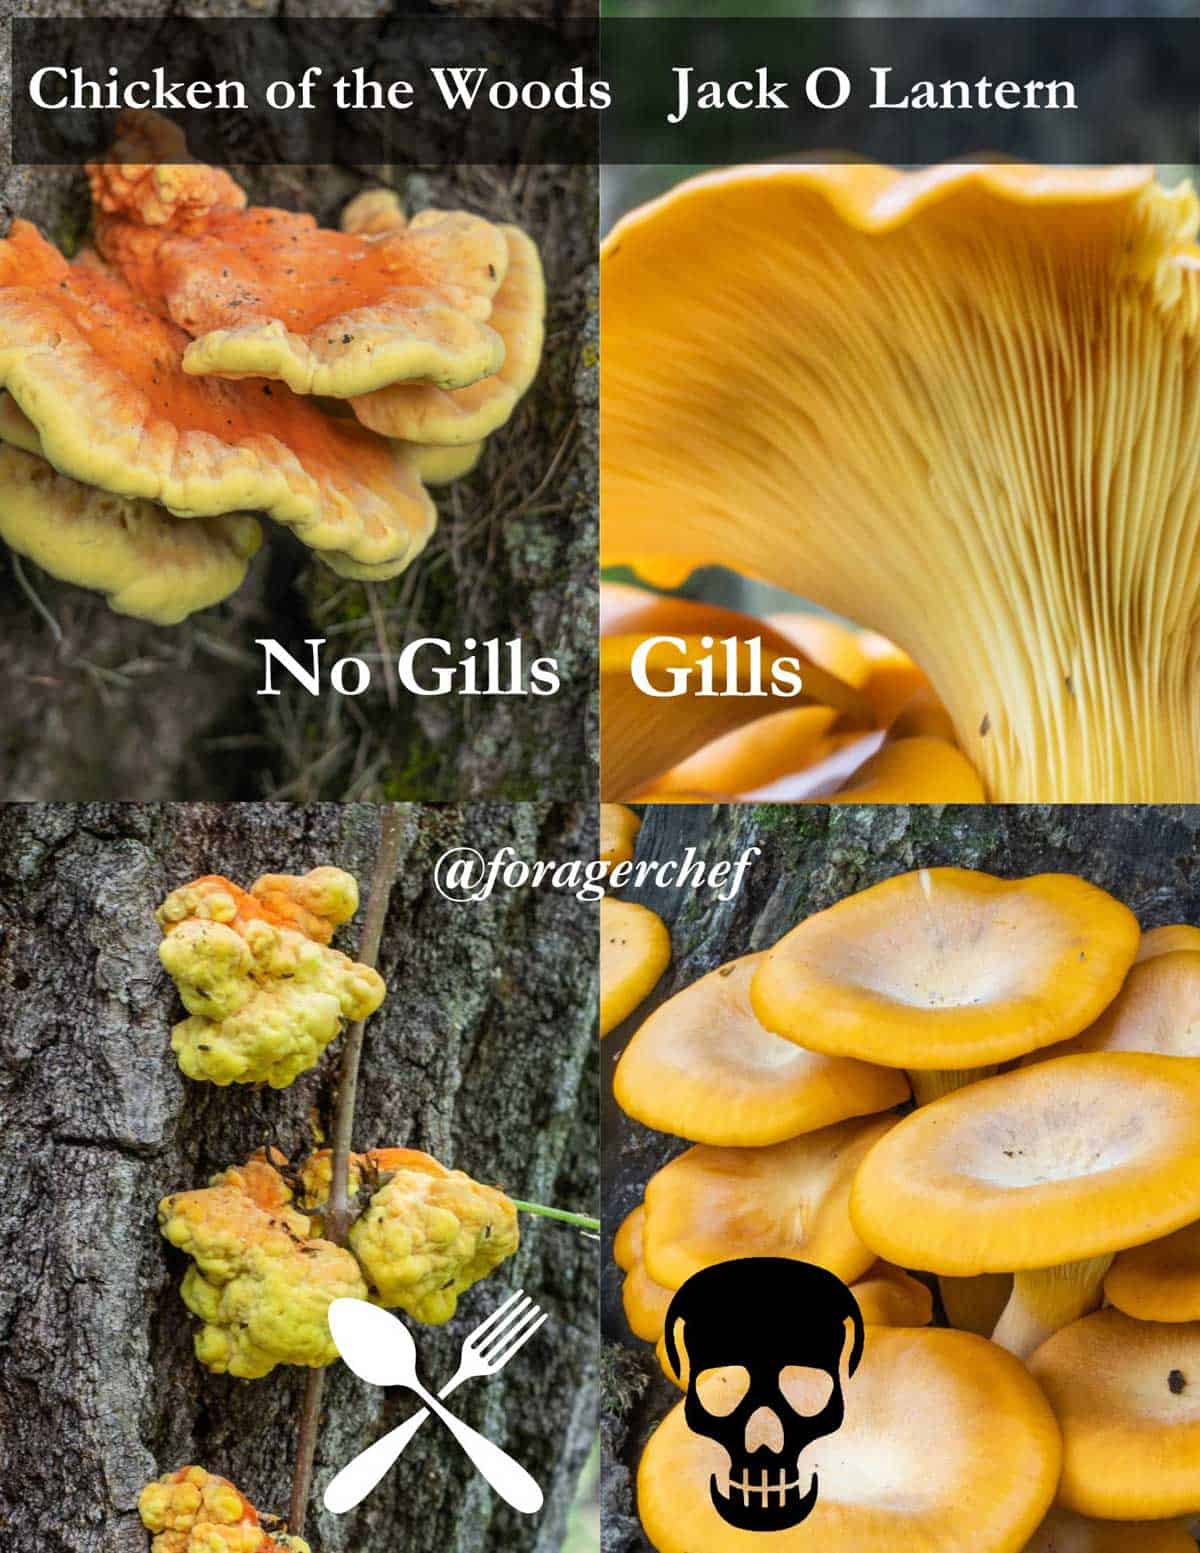 An infographic showing chicken of the woods mushrooms next to poisonous look a alike jack o lantern mushrooms for comparison.